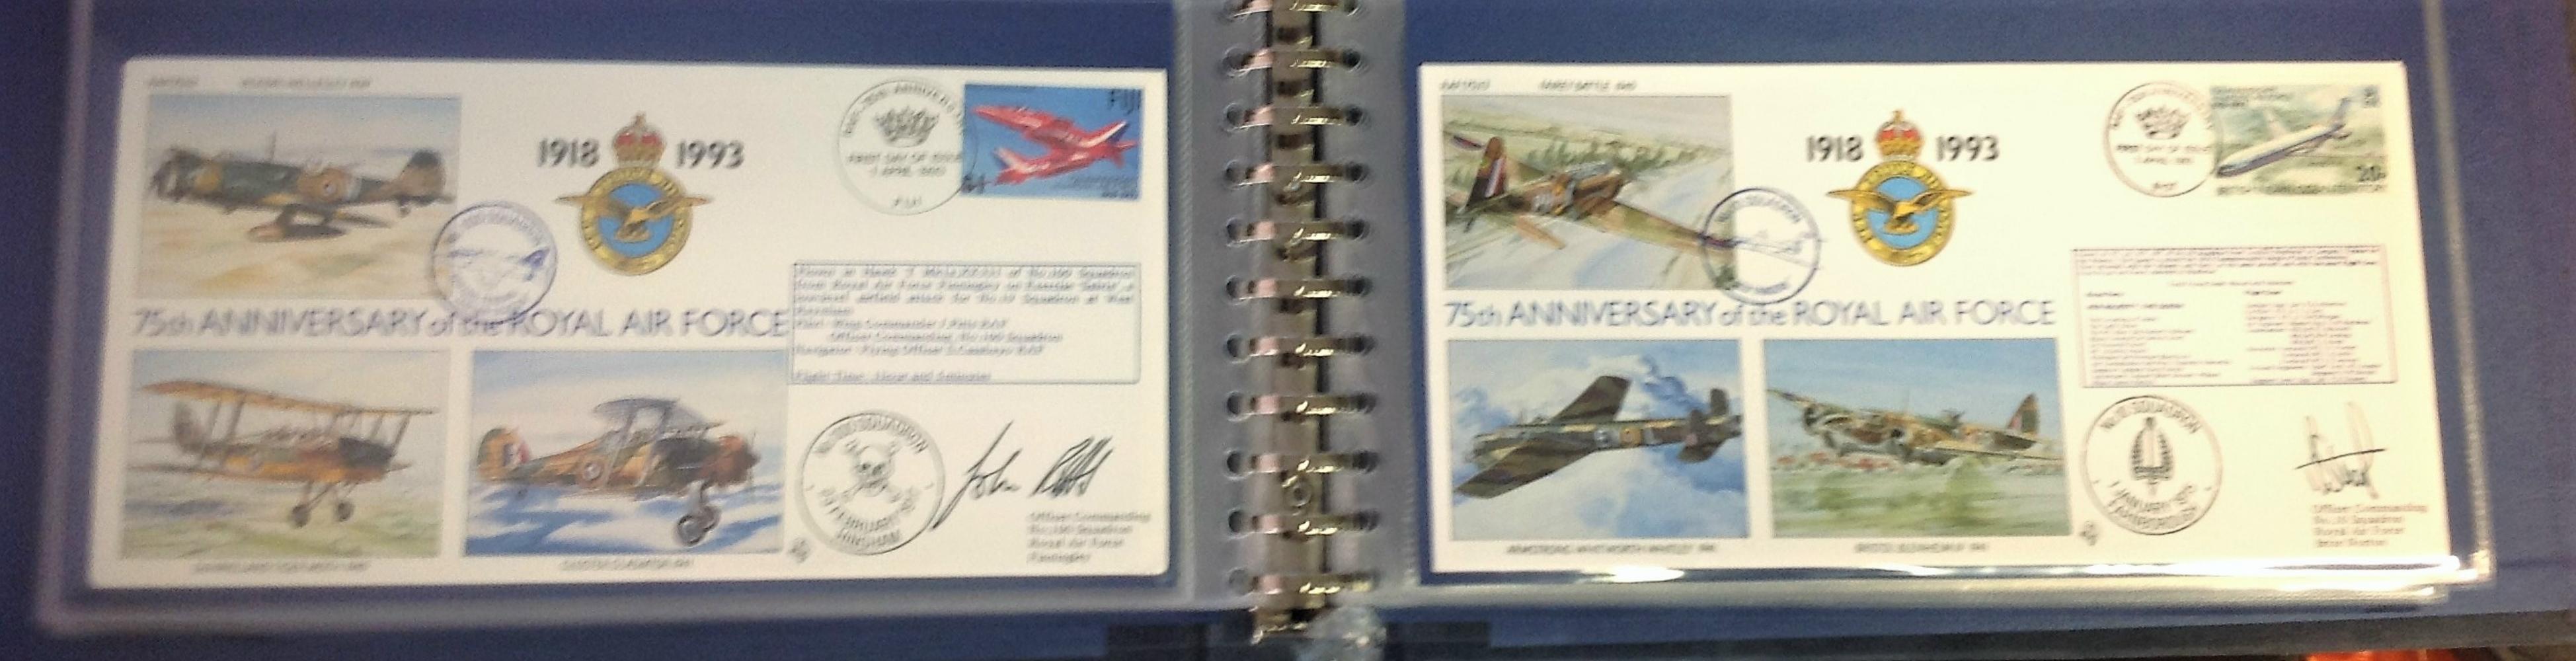 75th Ann RAF pilot signed collection. Complete set of the 30 covers in Blue Logoed RAF Album. Covers - Image 8 of 8